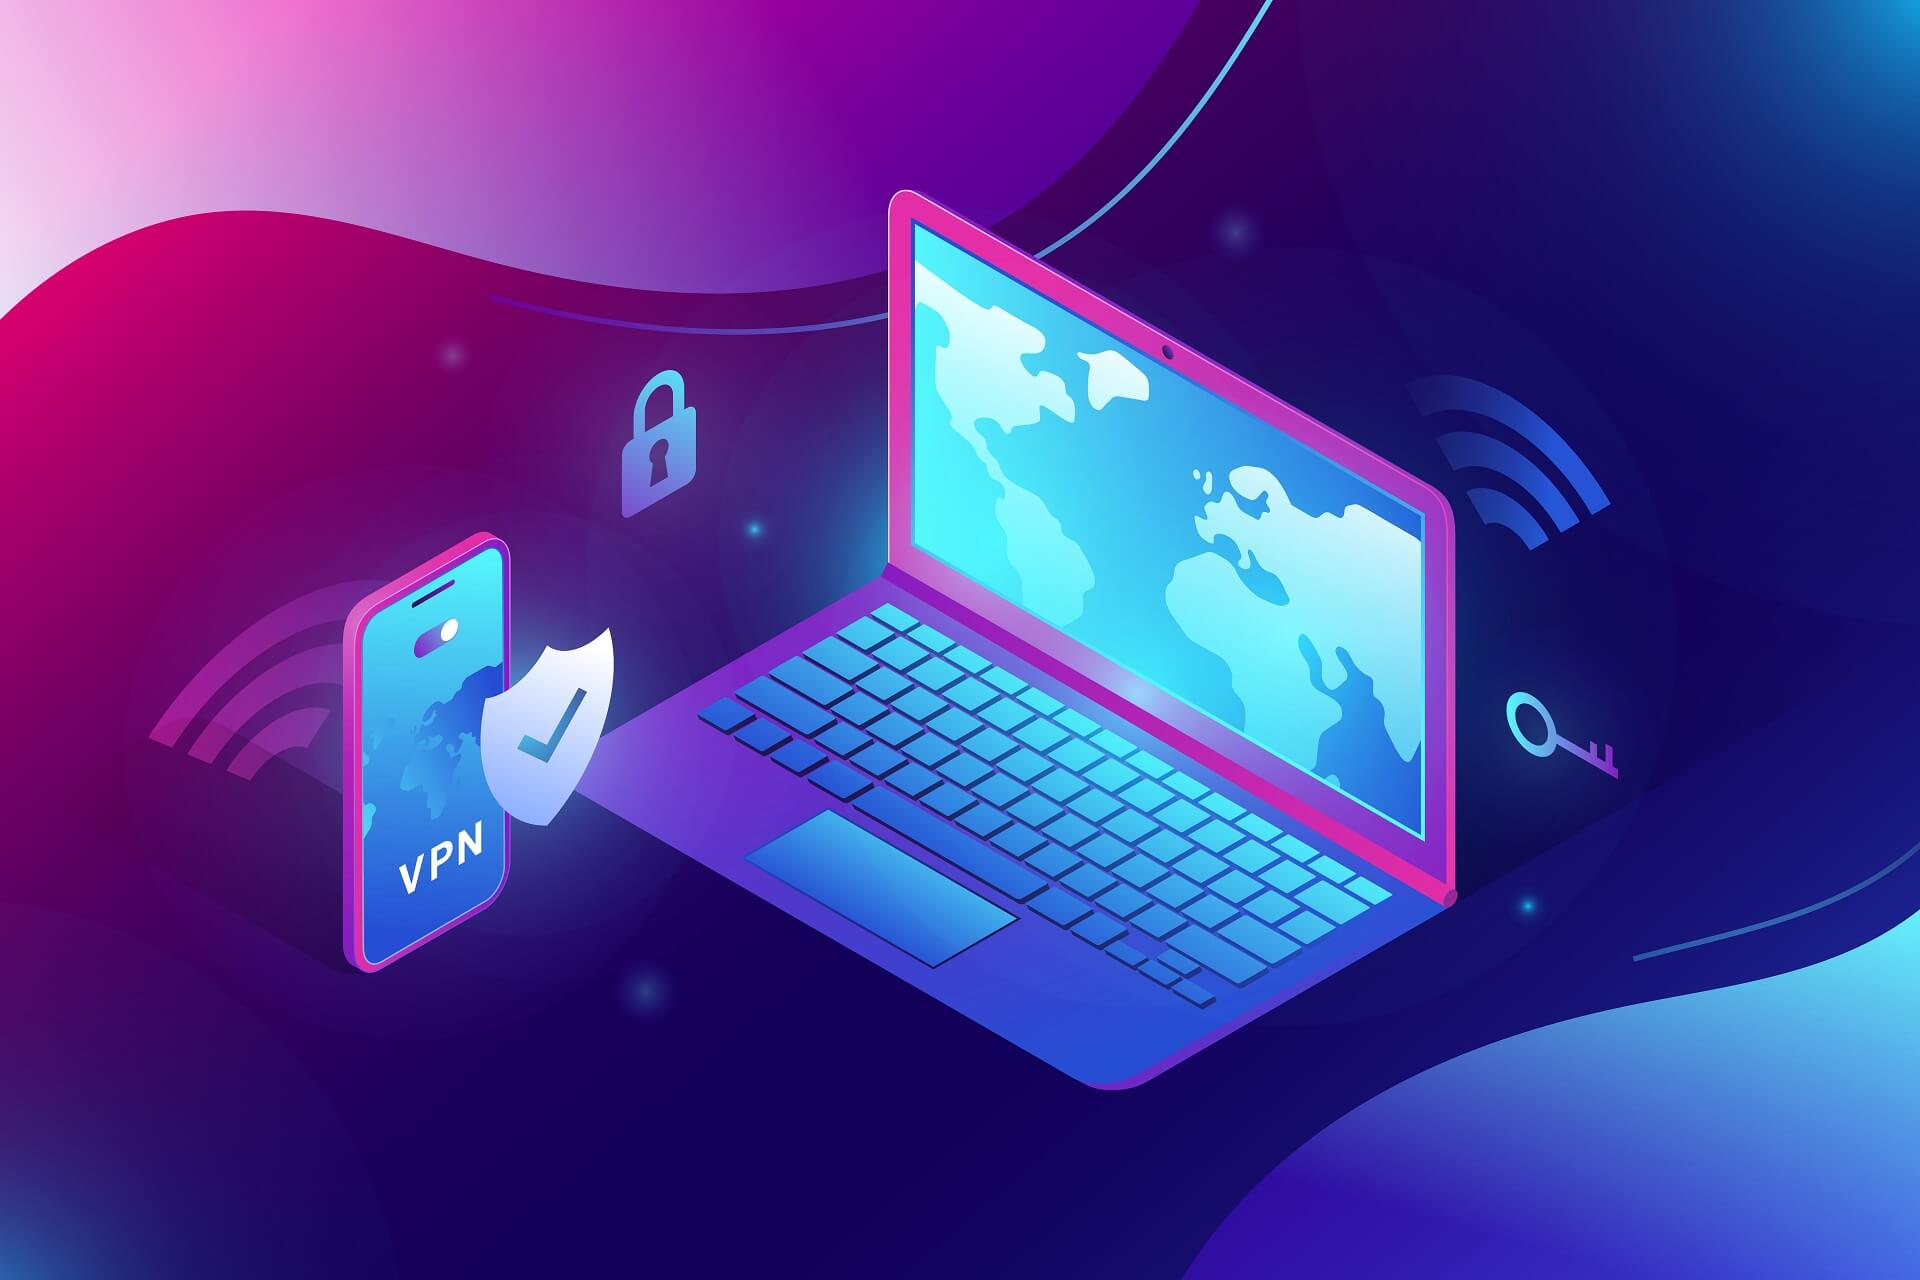 6 best VPN software for Windows 10 PCs [Updated Weekly]